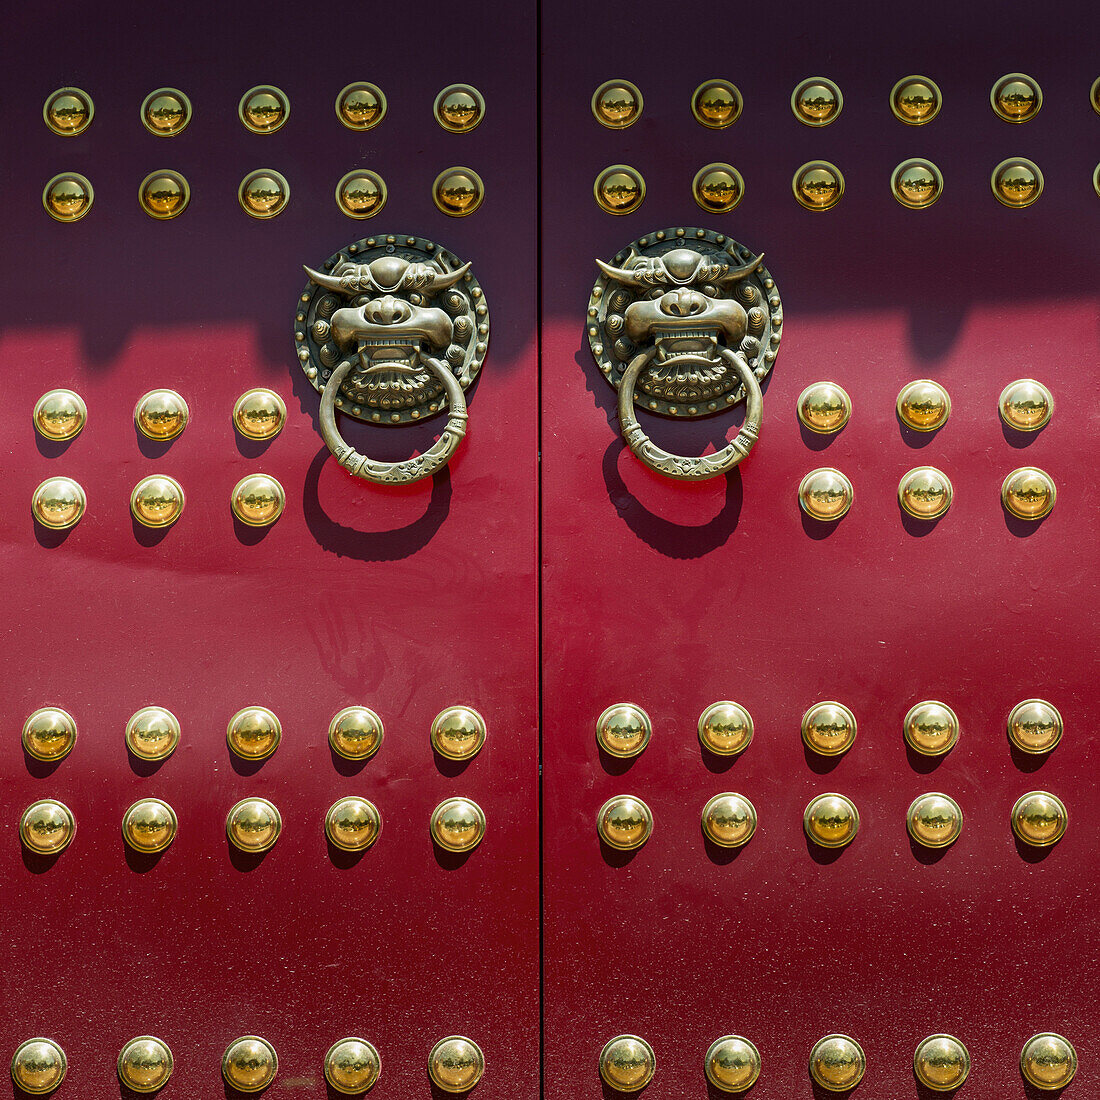 Red doors with round gold decorative pieces and door knockers in animal likeness